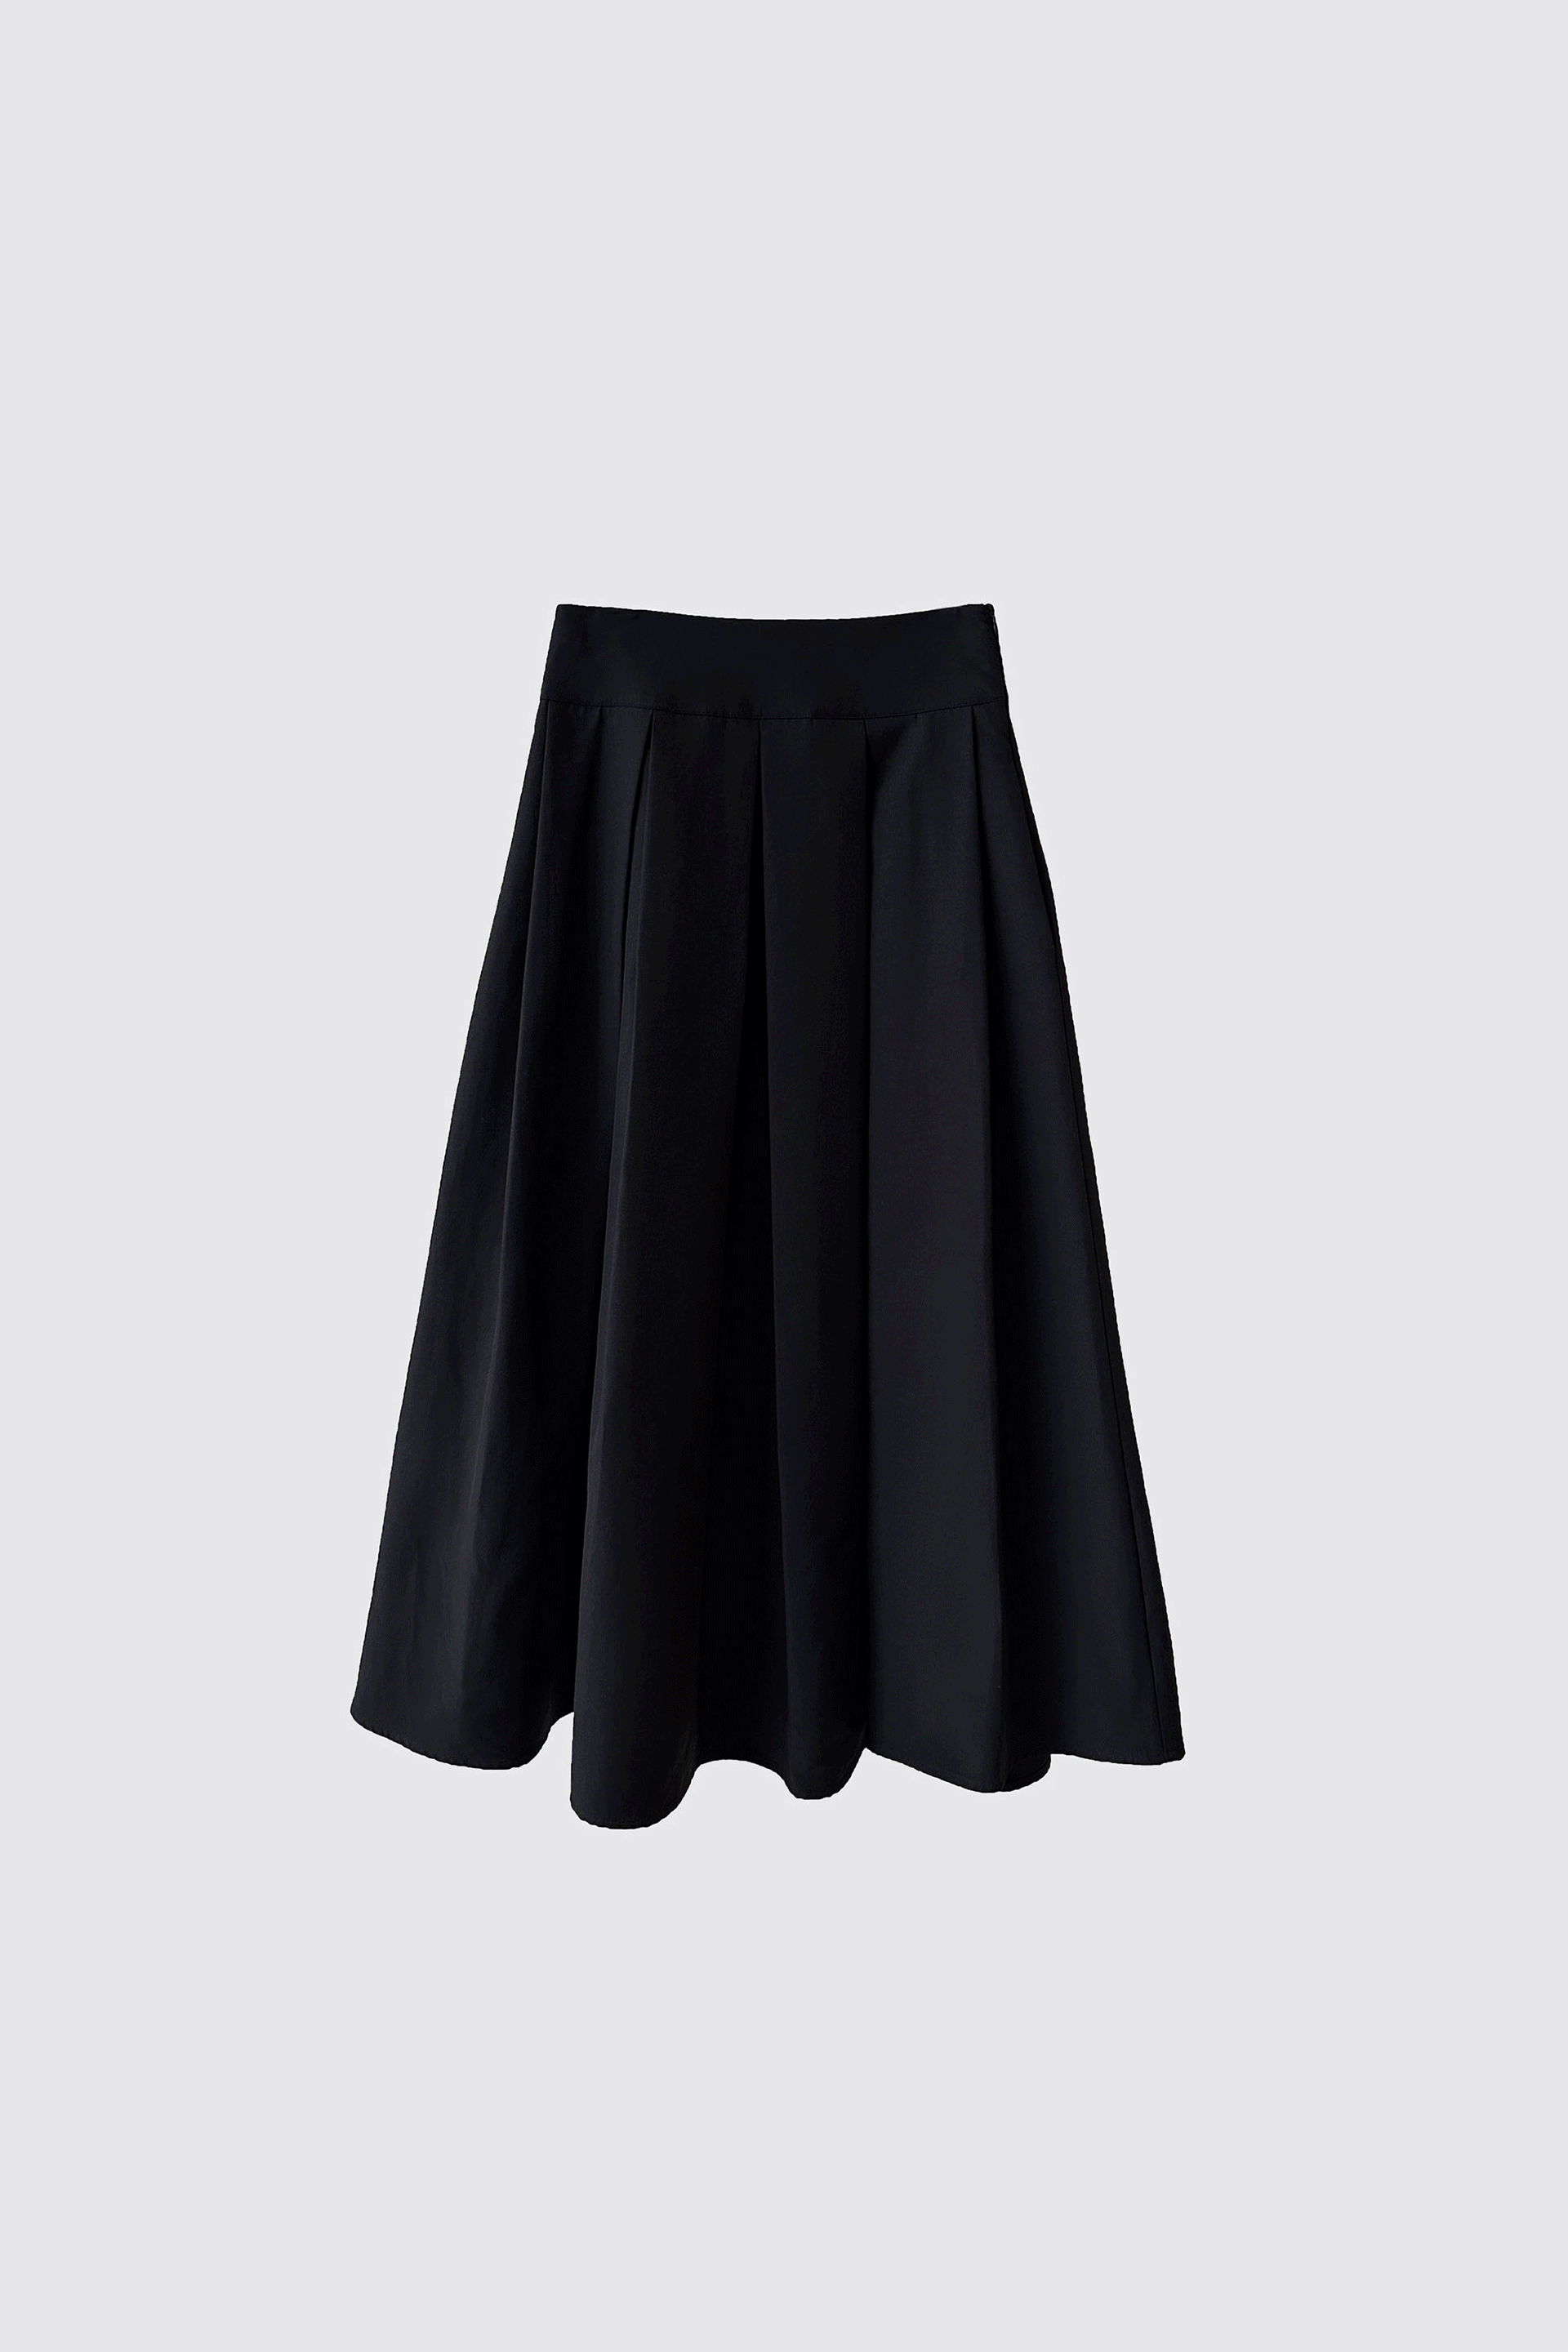 [MADE] TRENCH SKIRT(BLACK)당일발송